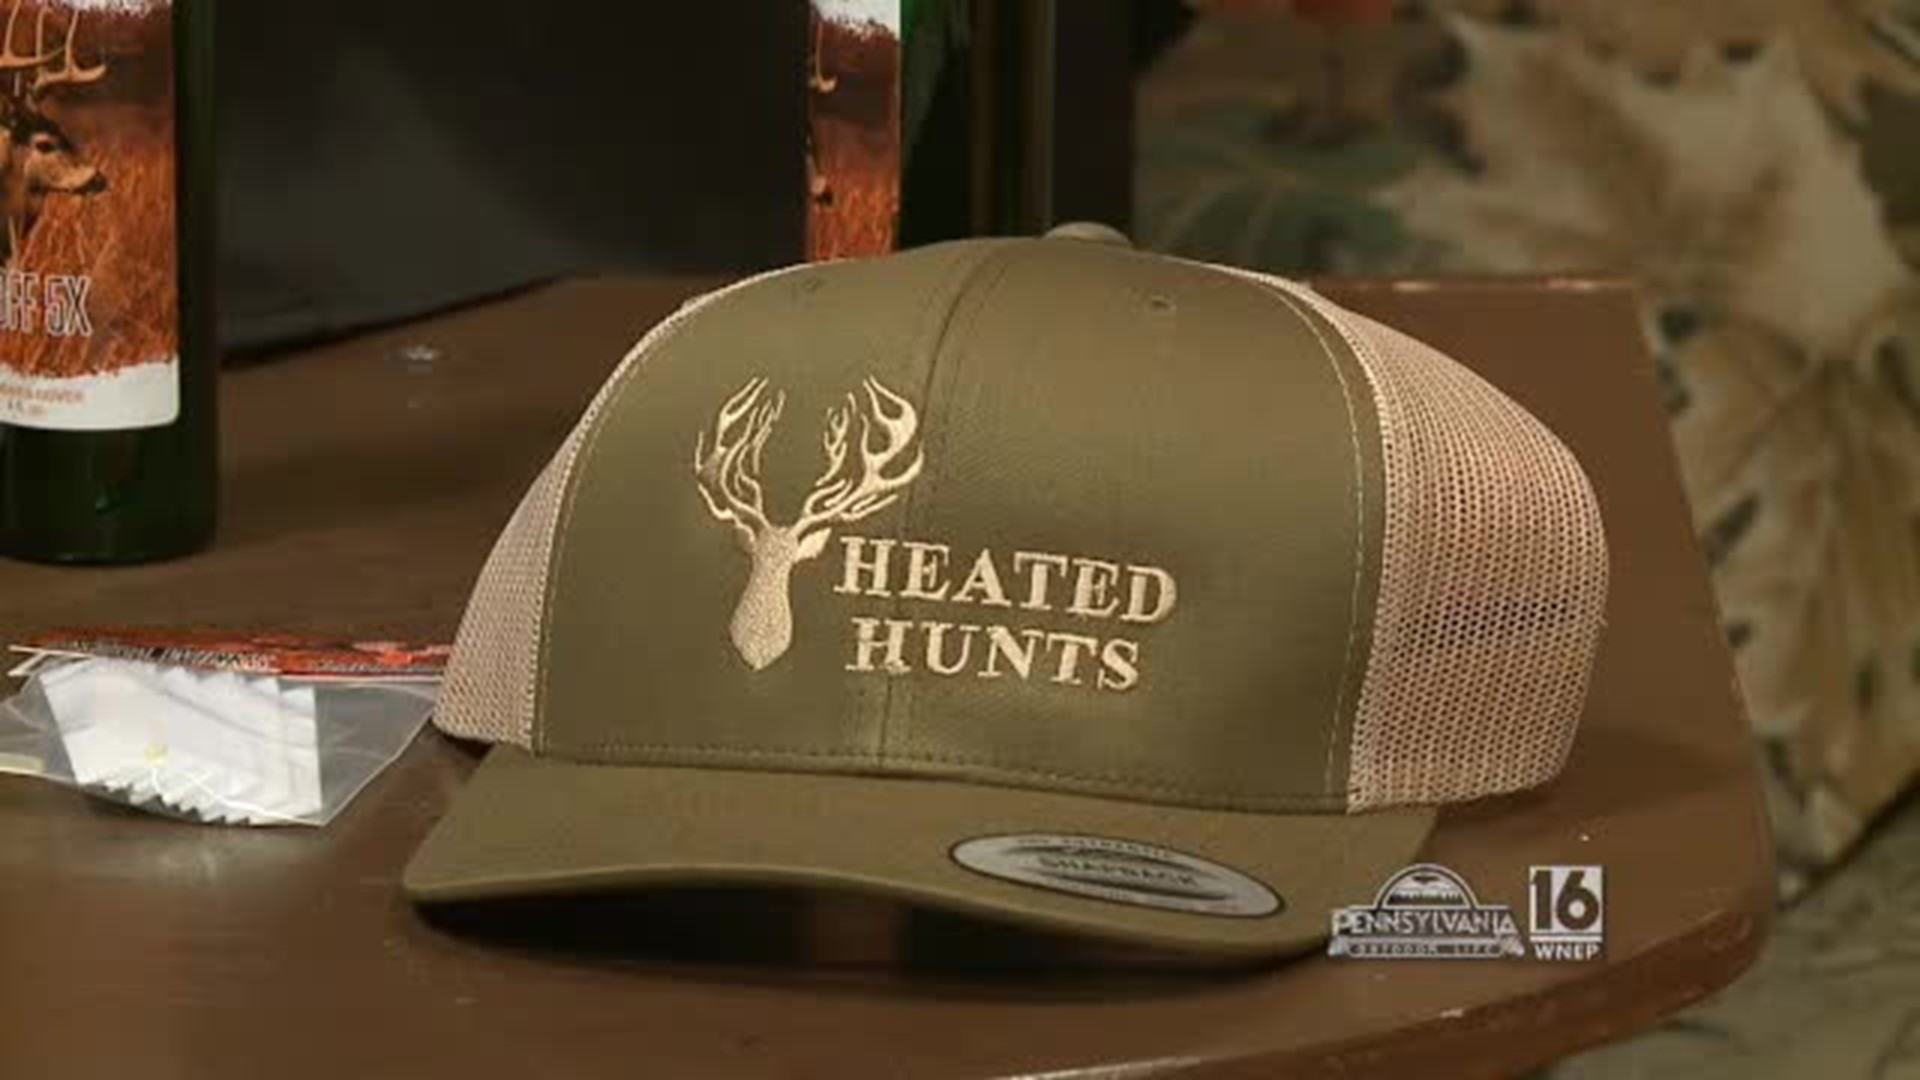 Heated Hunts Product Giveaway